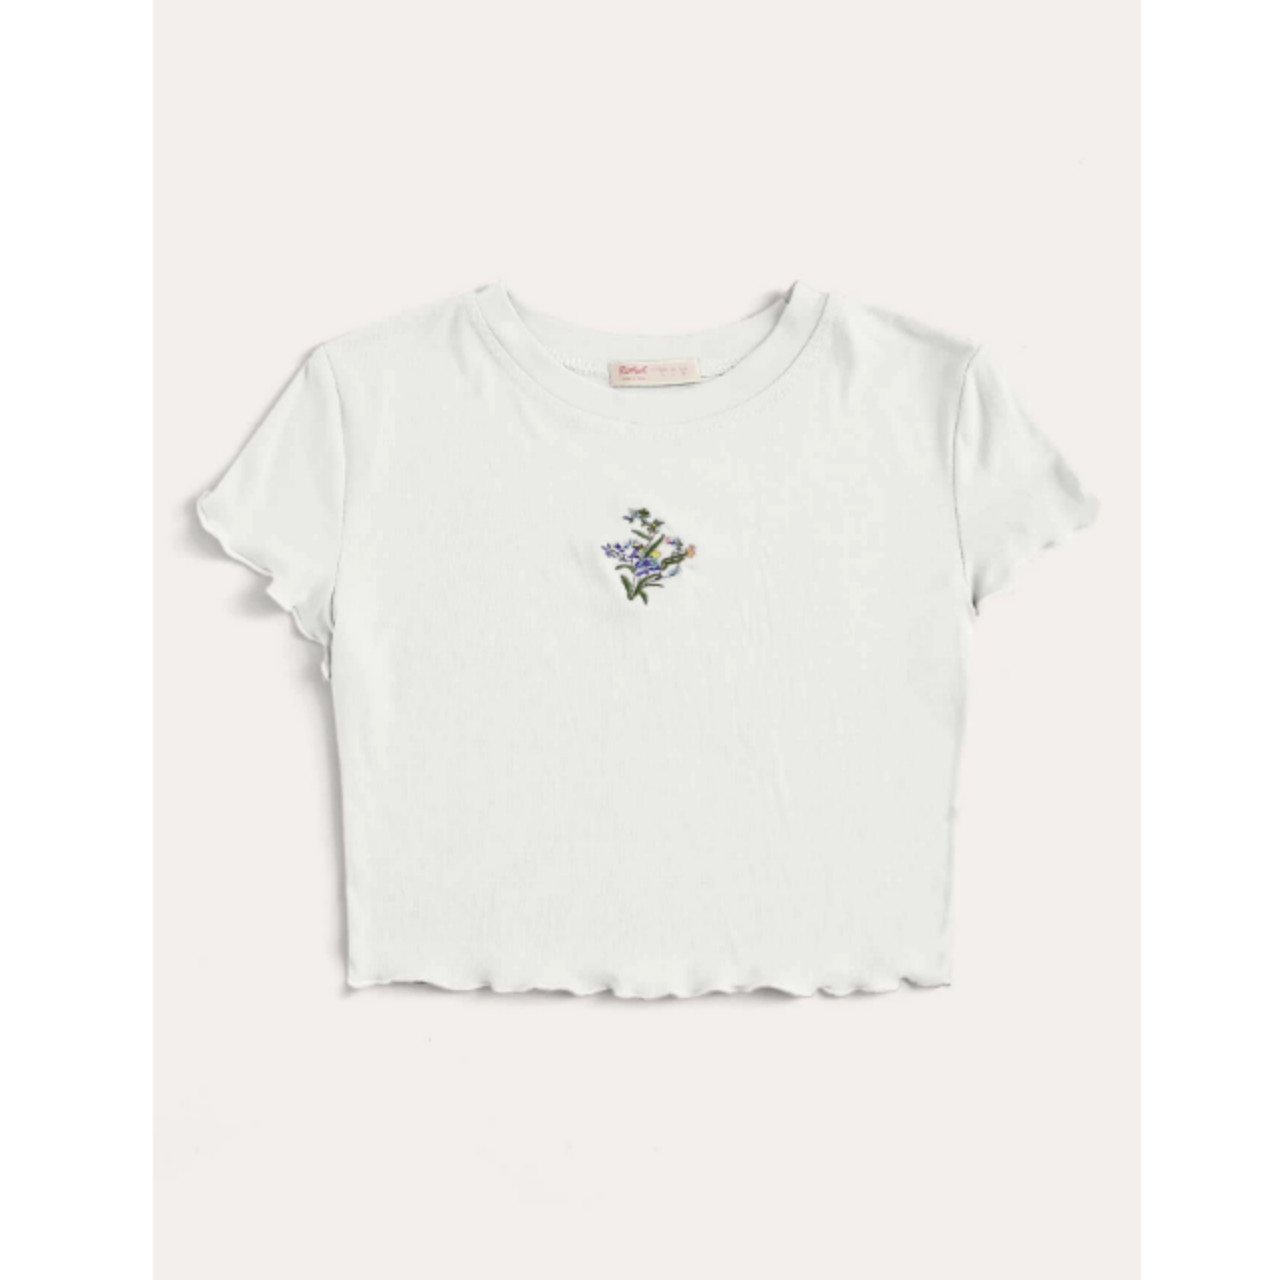 Flower embroidery crop tee s